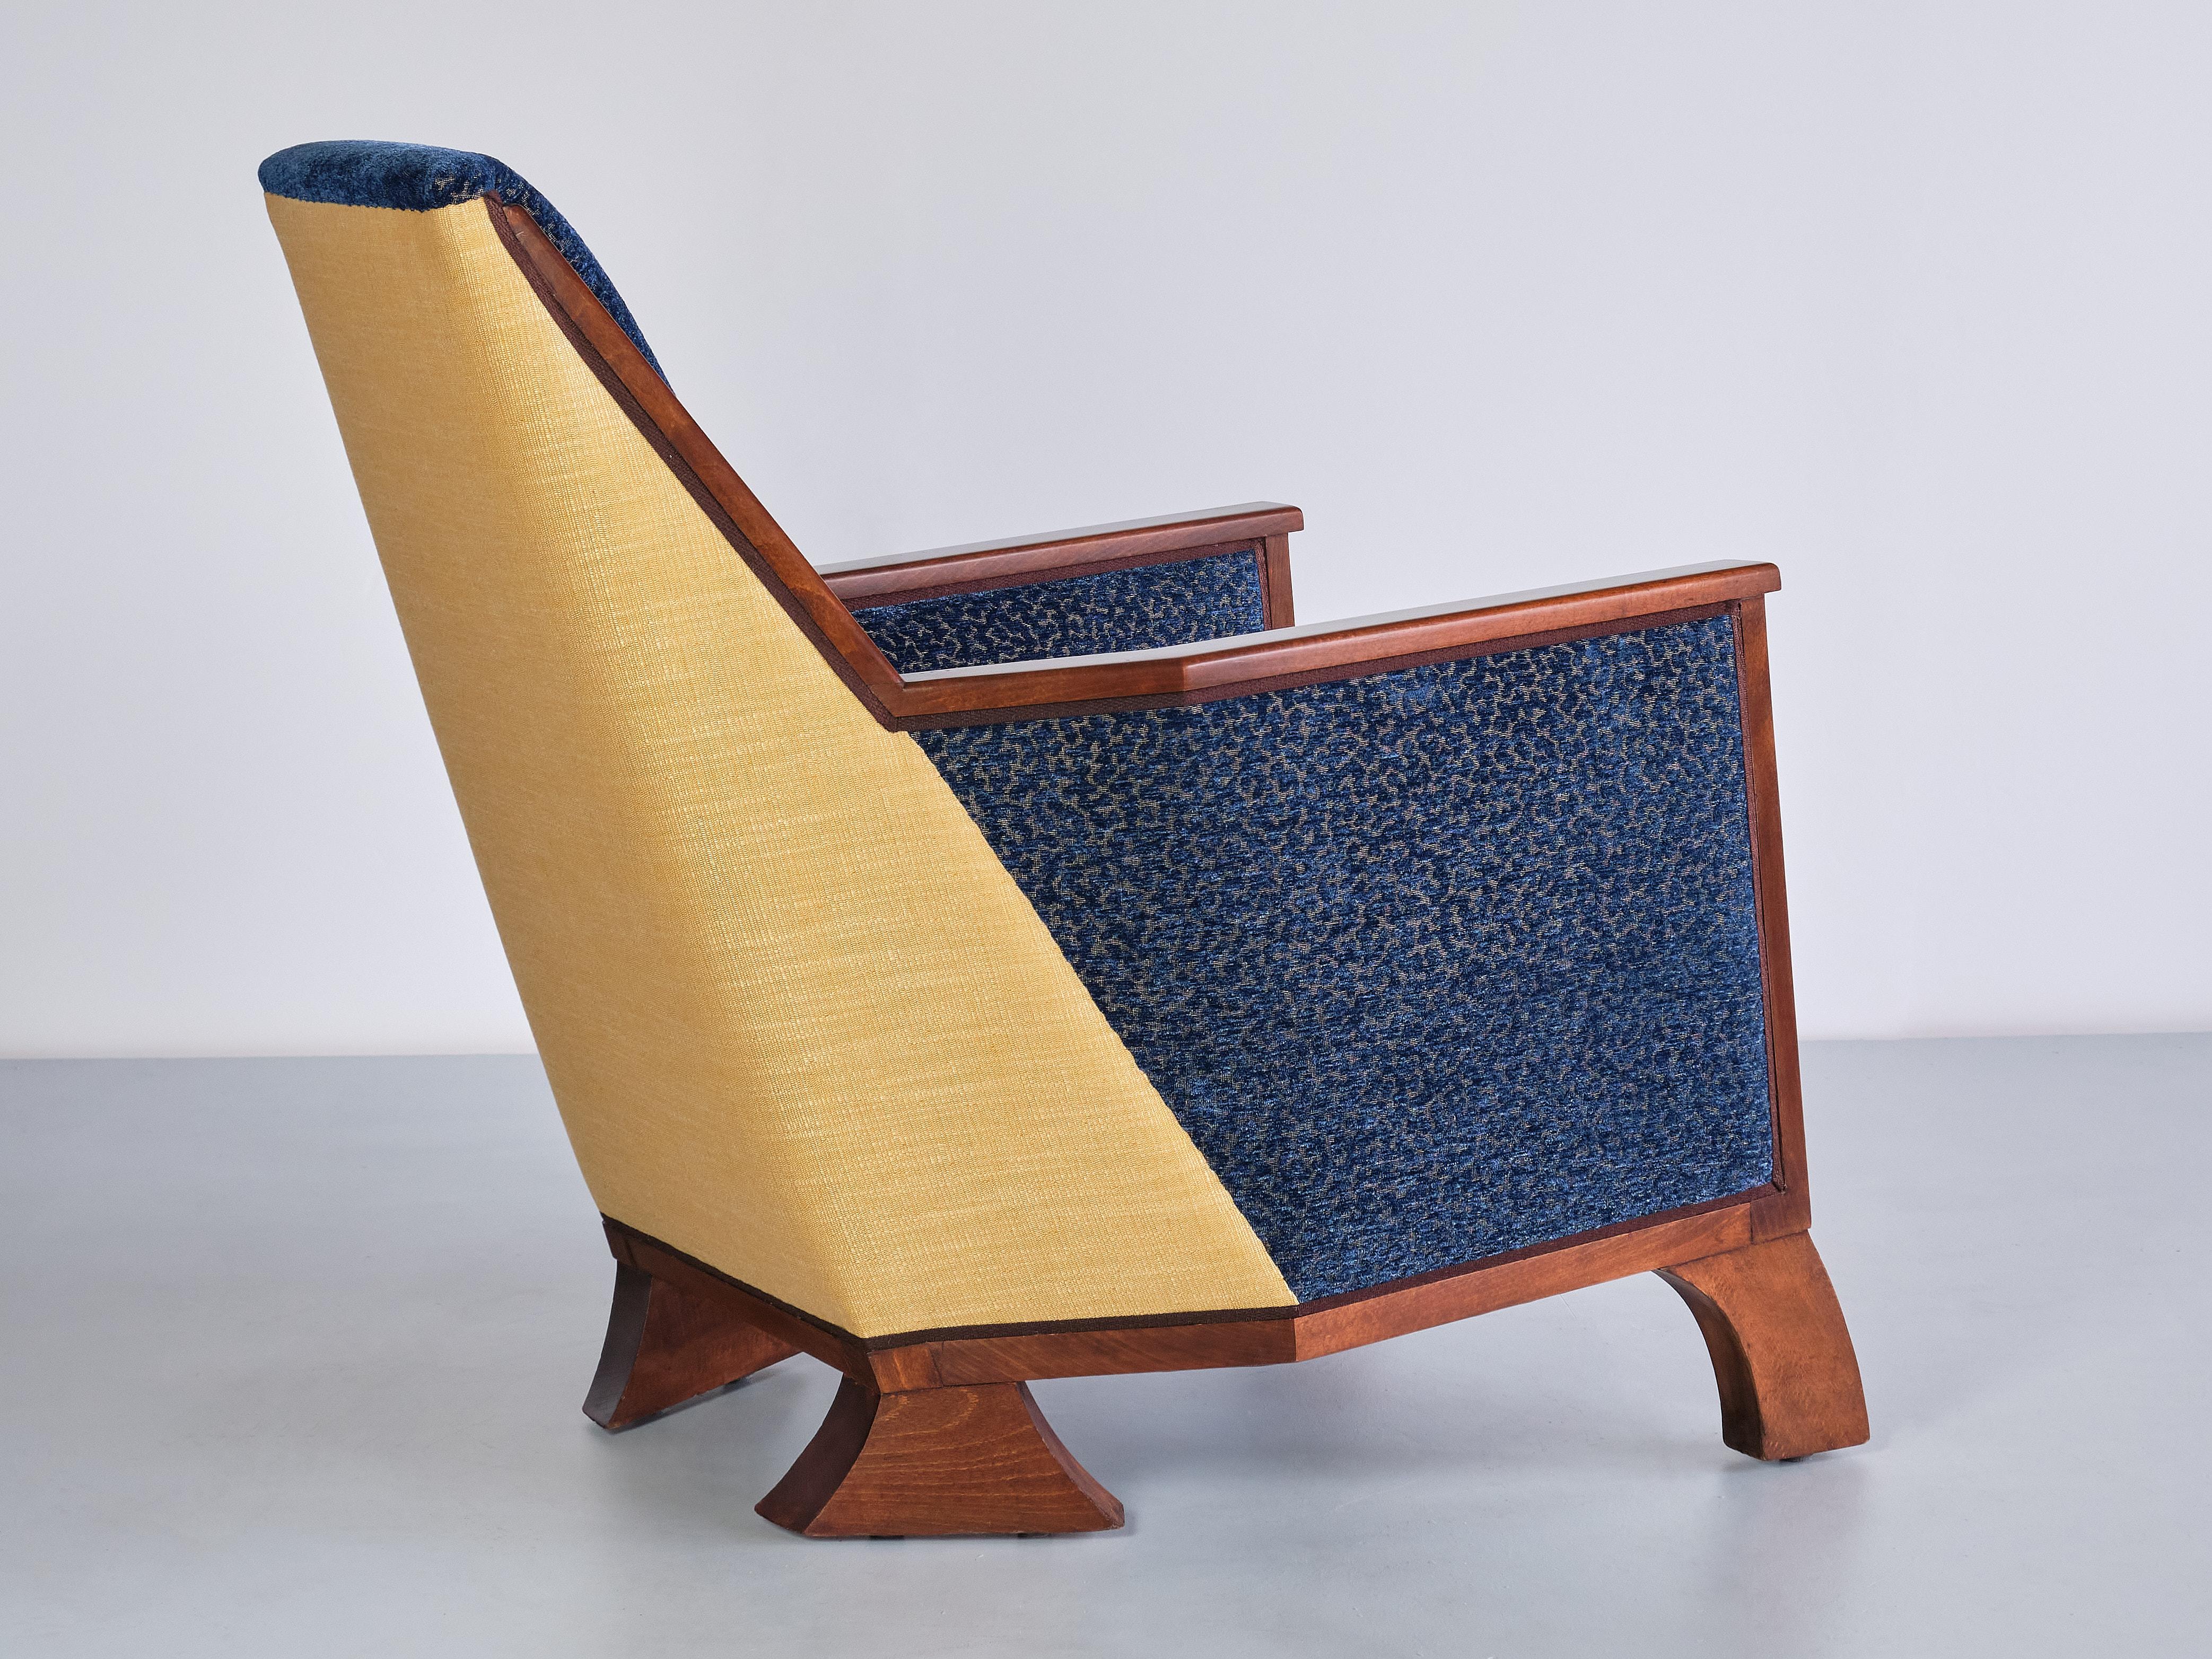 Exceptional Art Deco Arm Chair in Blue Velvet and Maple, Northern France, 1920s For Sale 5